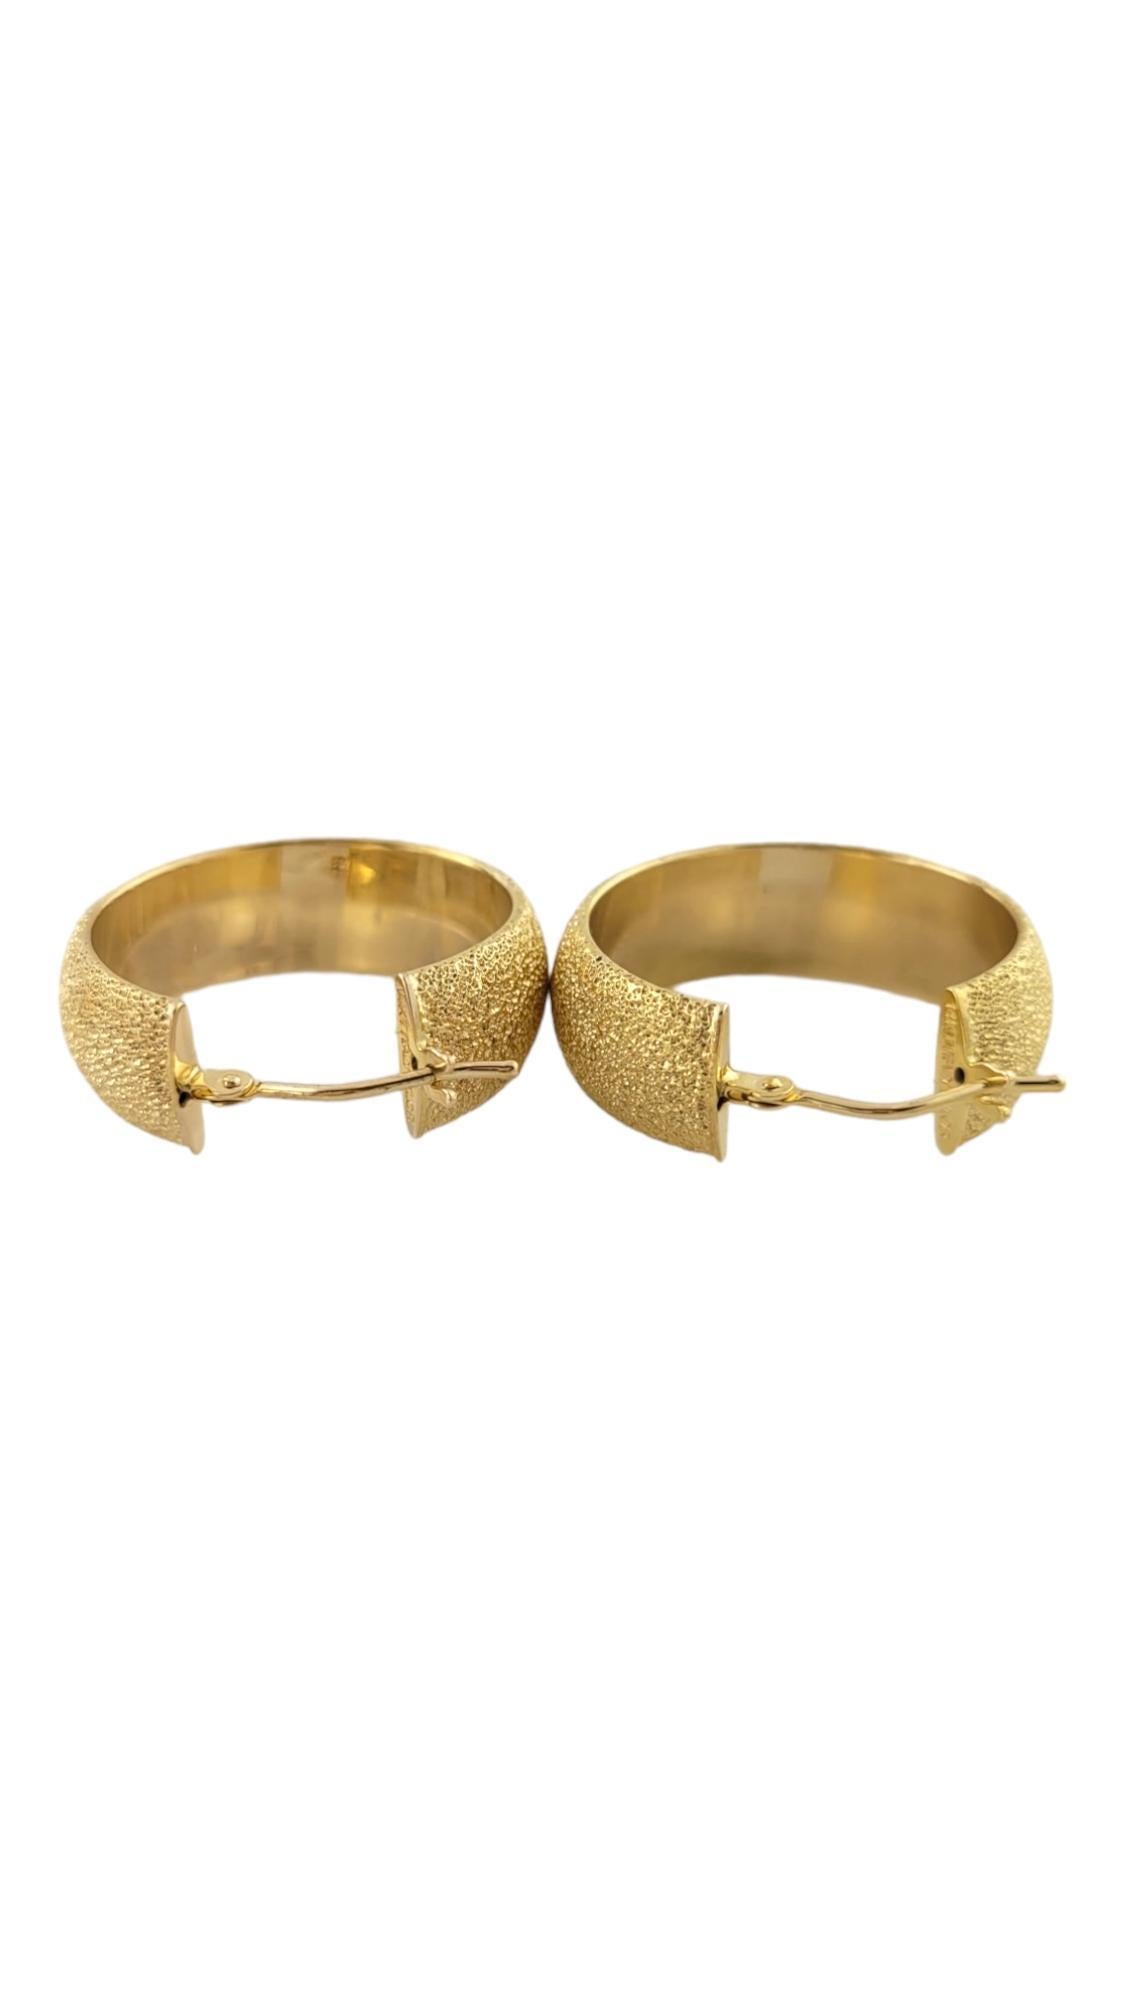 14K Yellow Gold Textured Sparkly Hoop Earrings #17378 In Good Condition For Sale In Washington Depot, CT